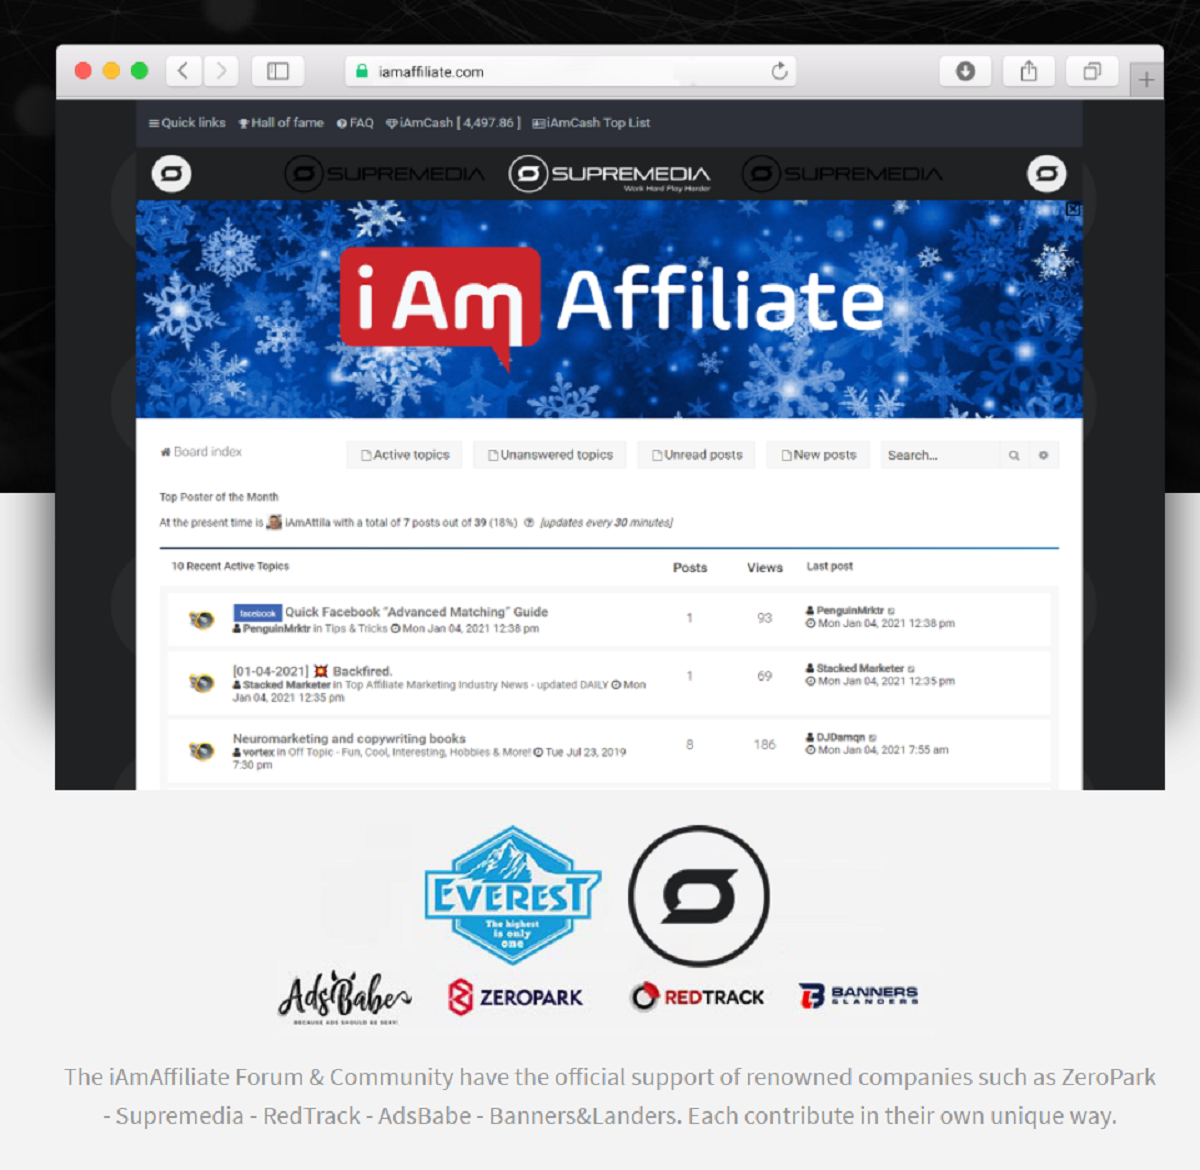 What Are the Features of Iamaffiliate?